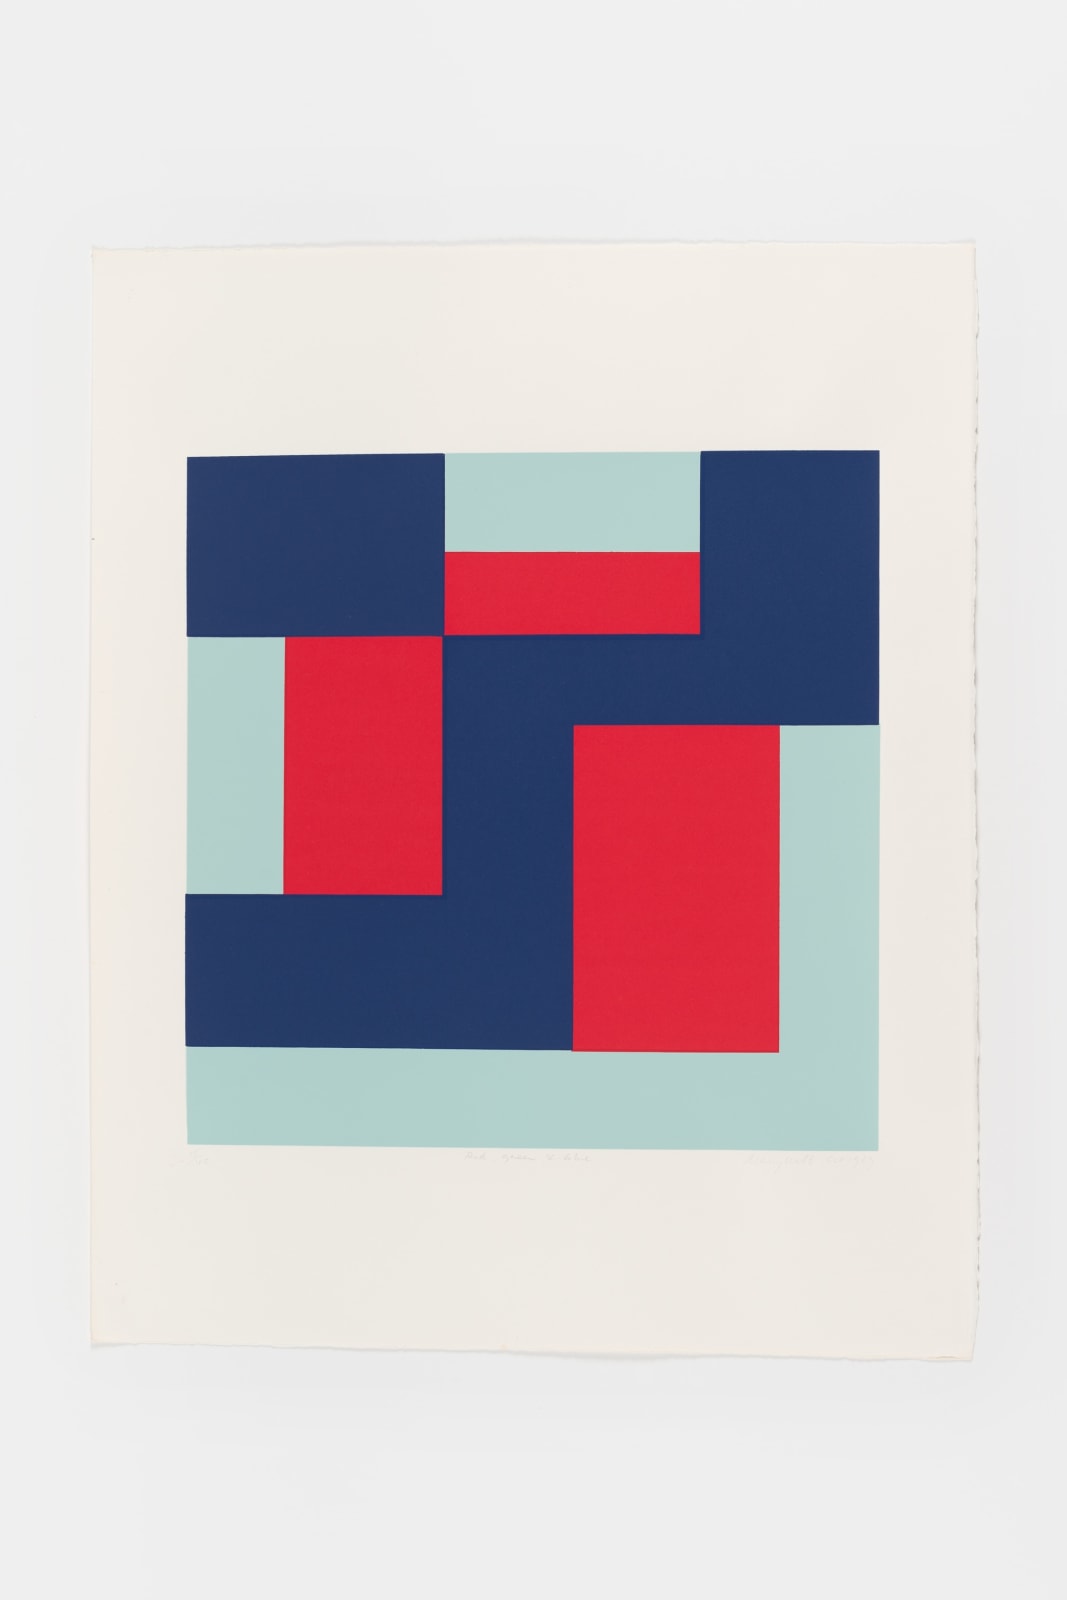 Mary Webb, Red, blue & green, 1969